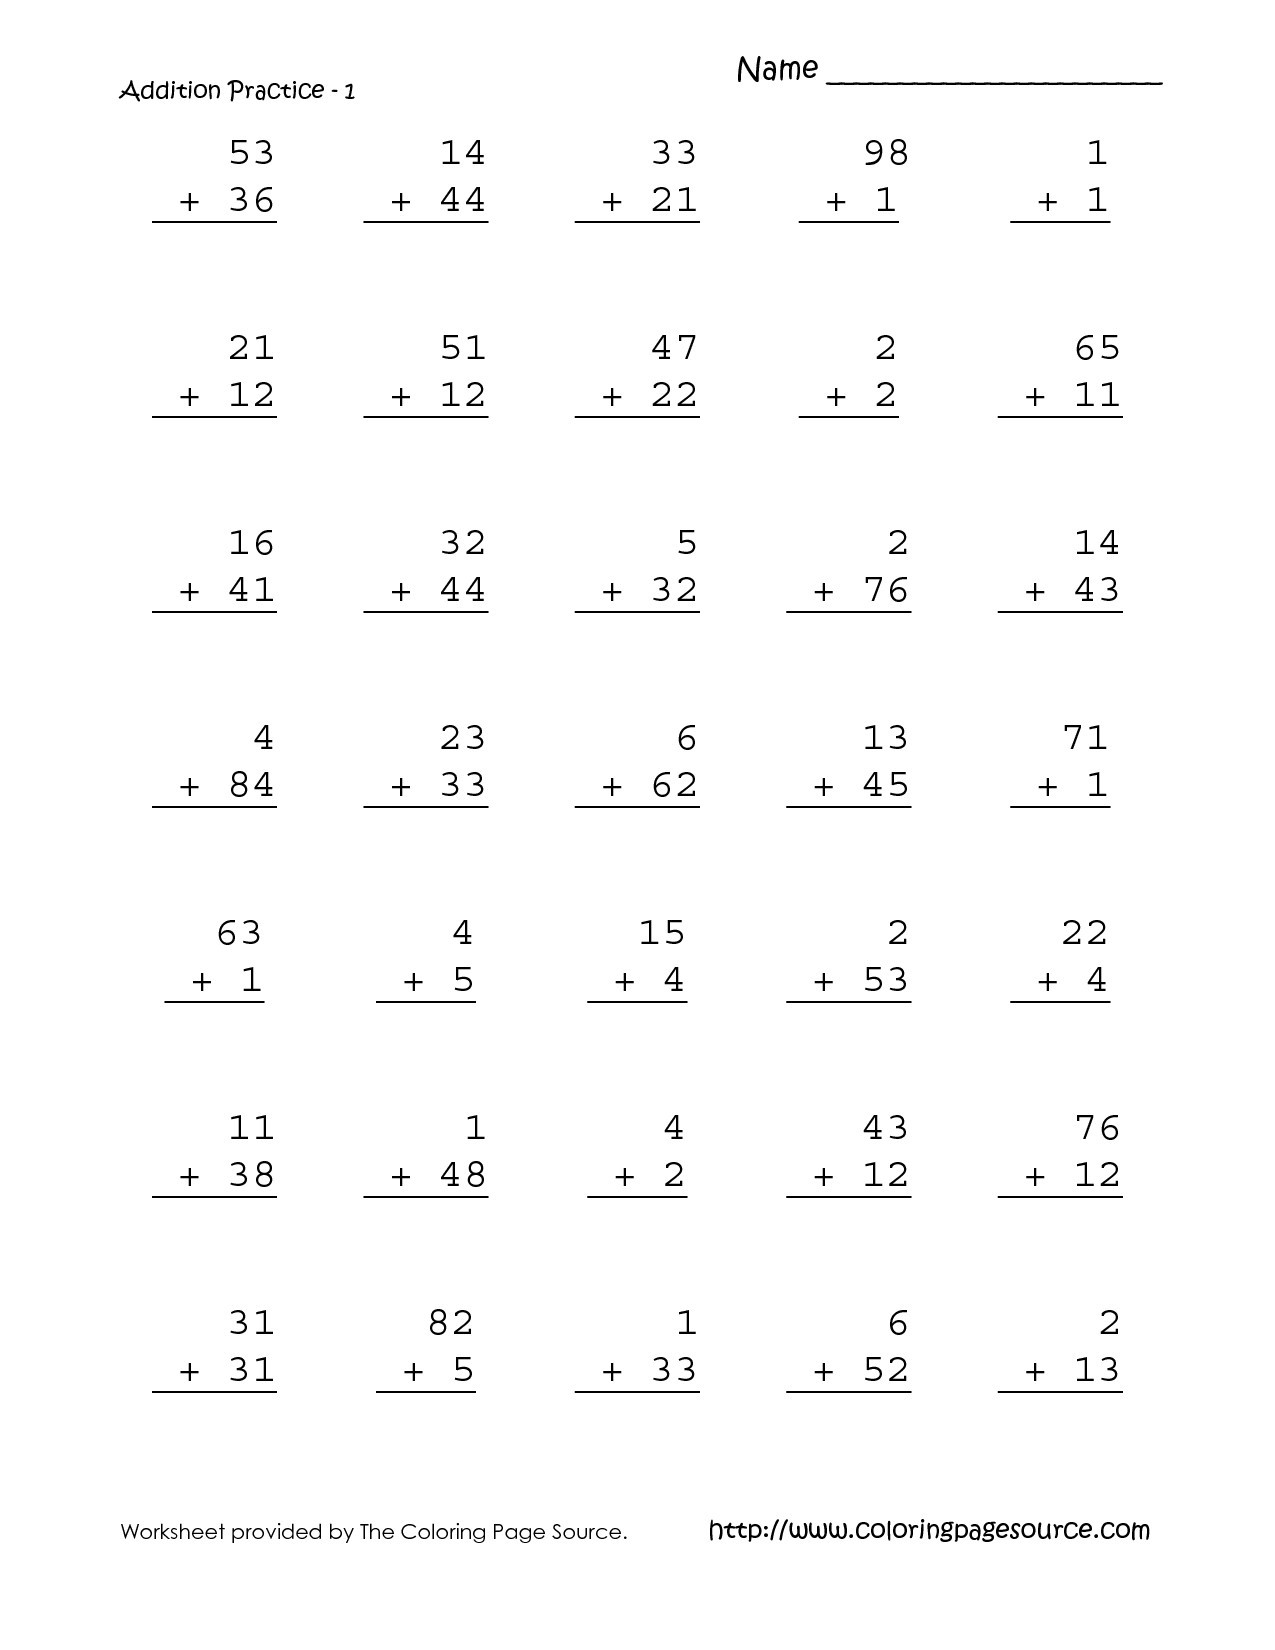 Free Math Worksheets Second Grade 2 Addition Adding whole Tens 3 Addends